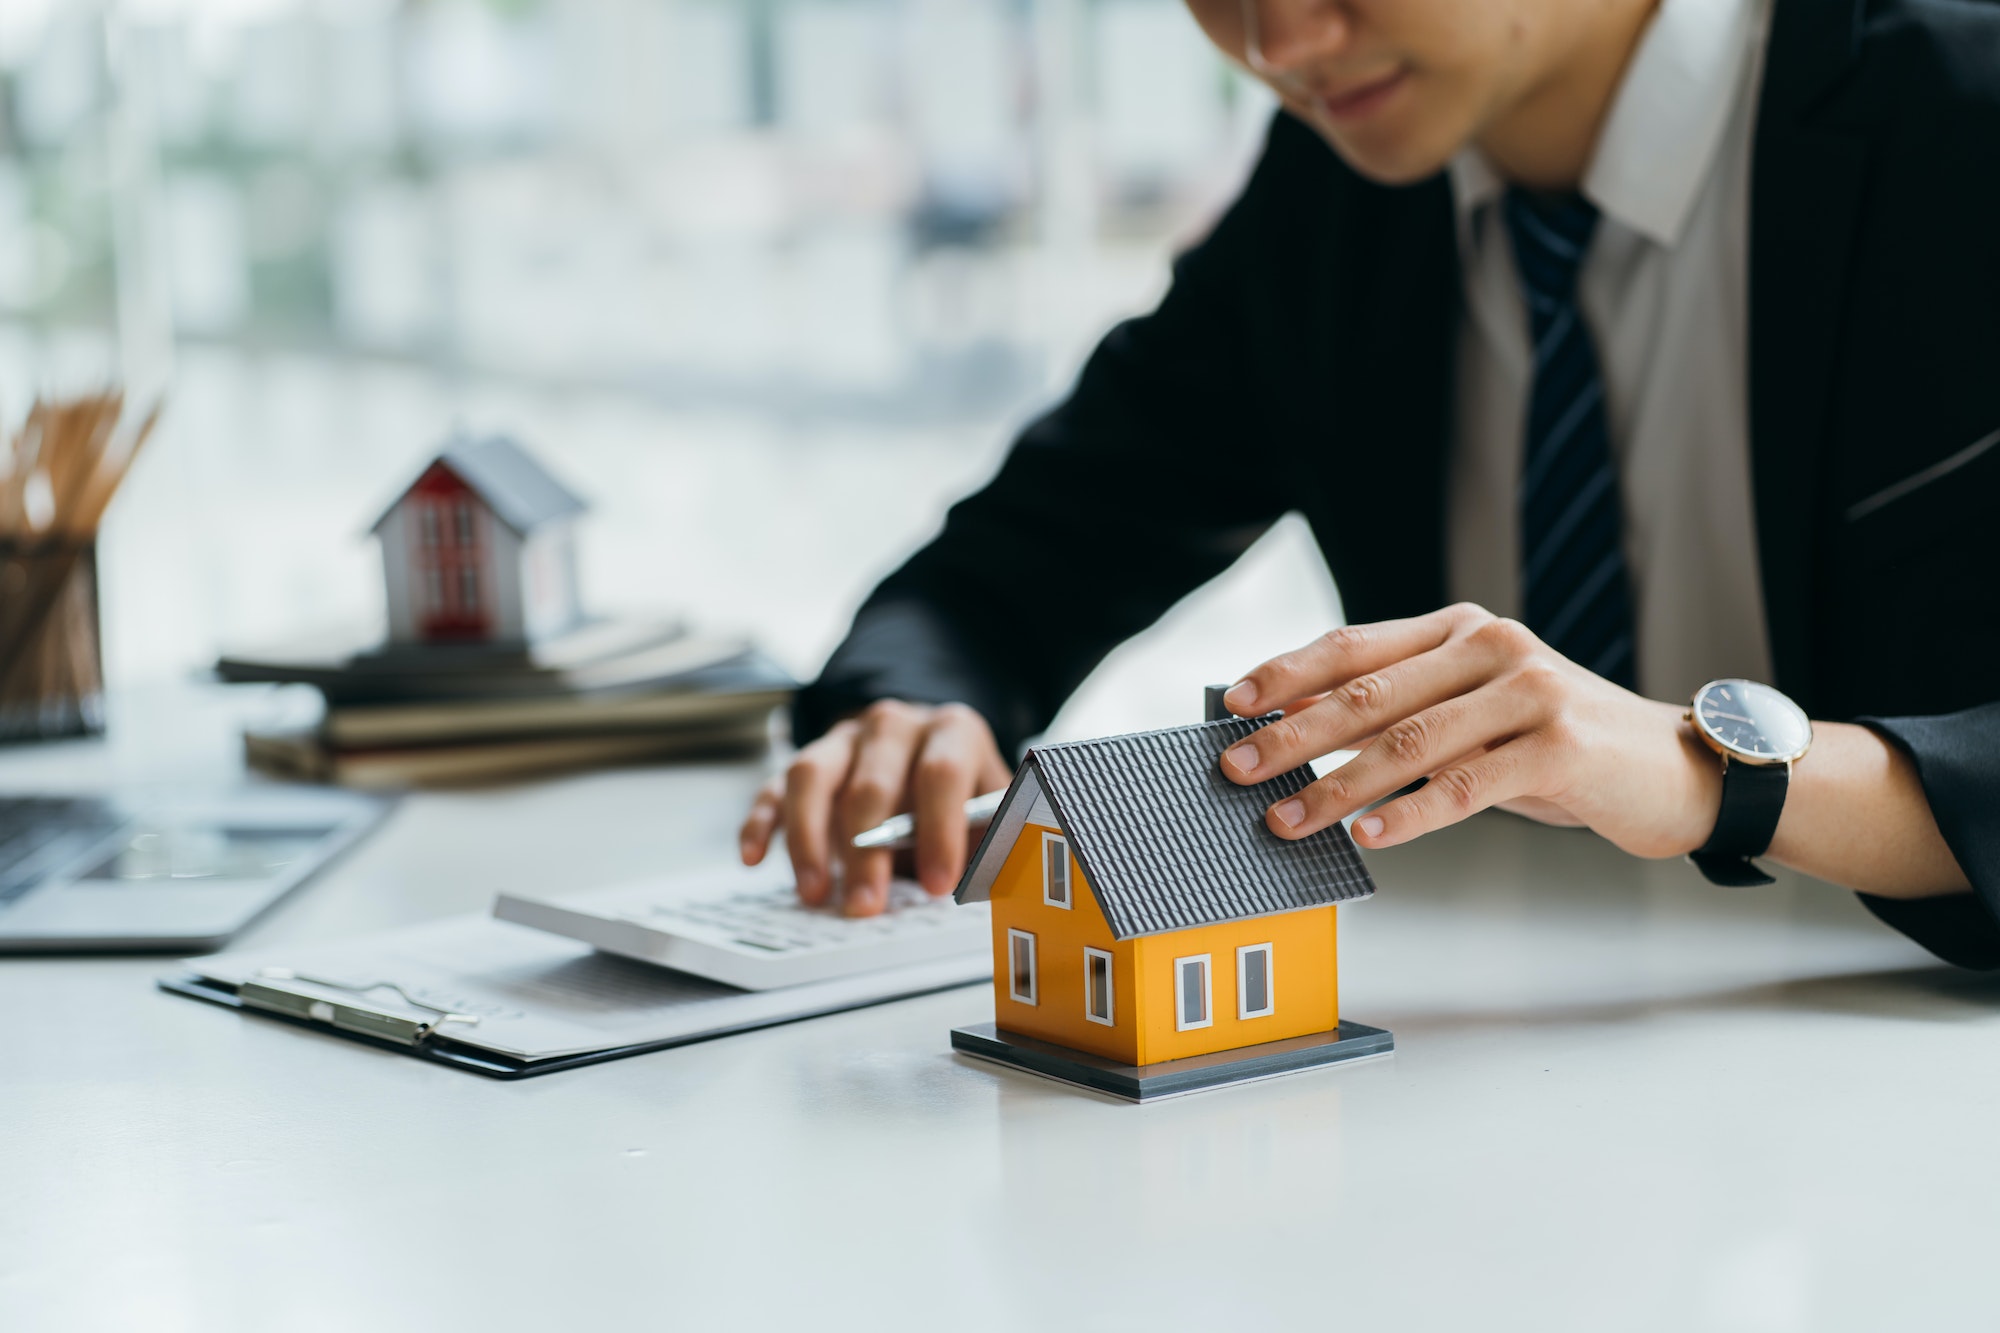 How to negotiate the price of a property down?